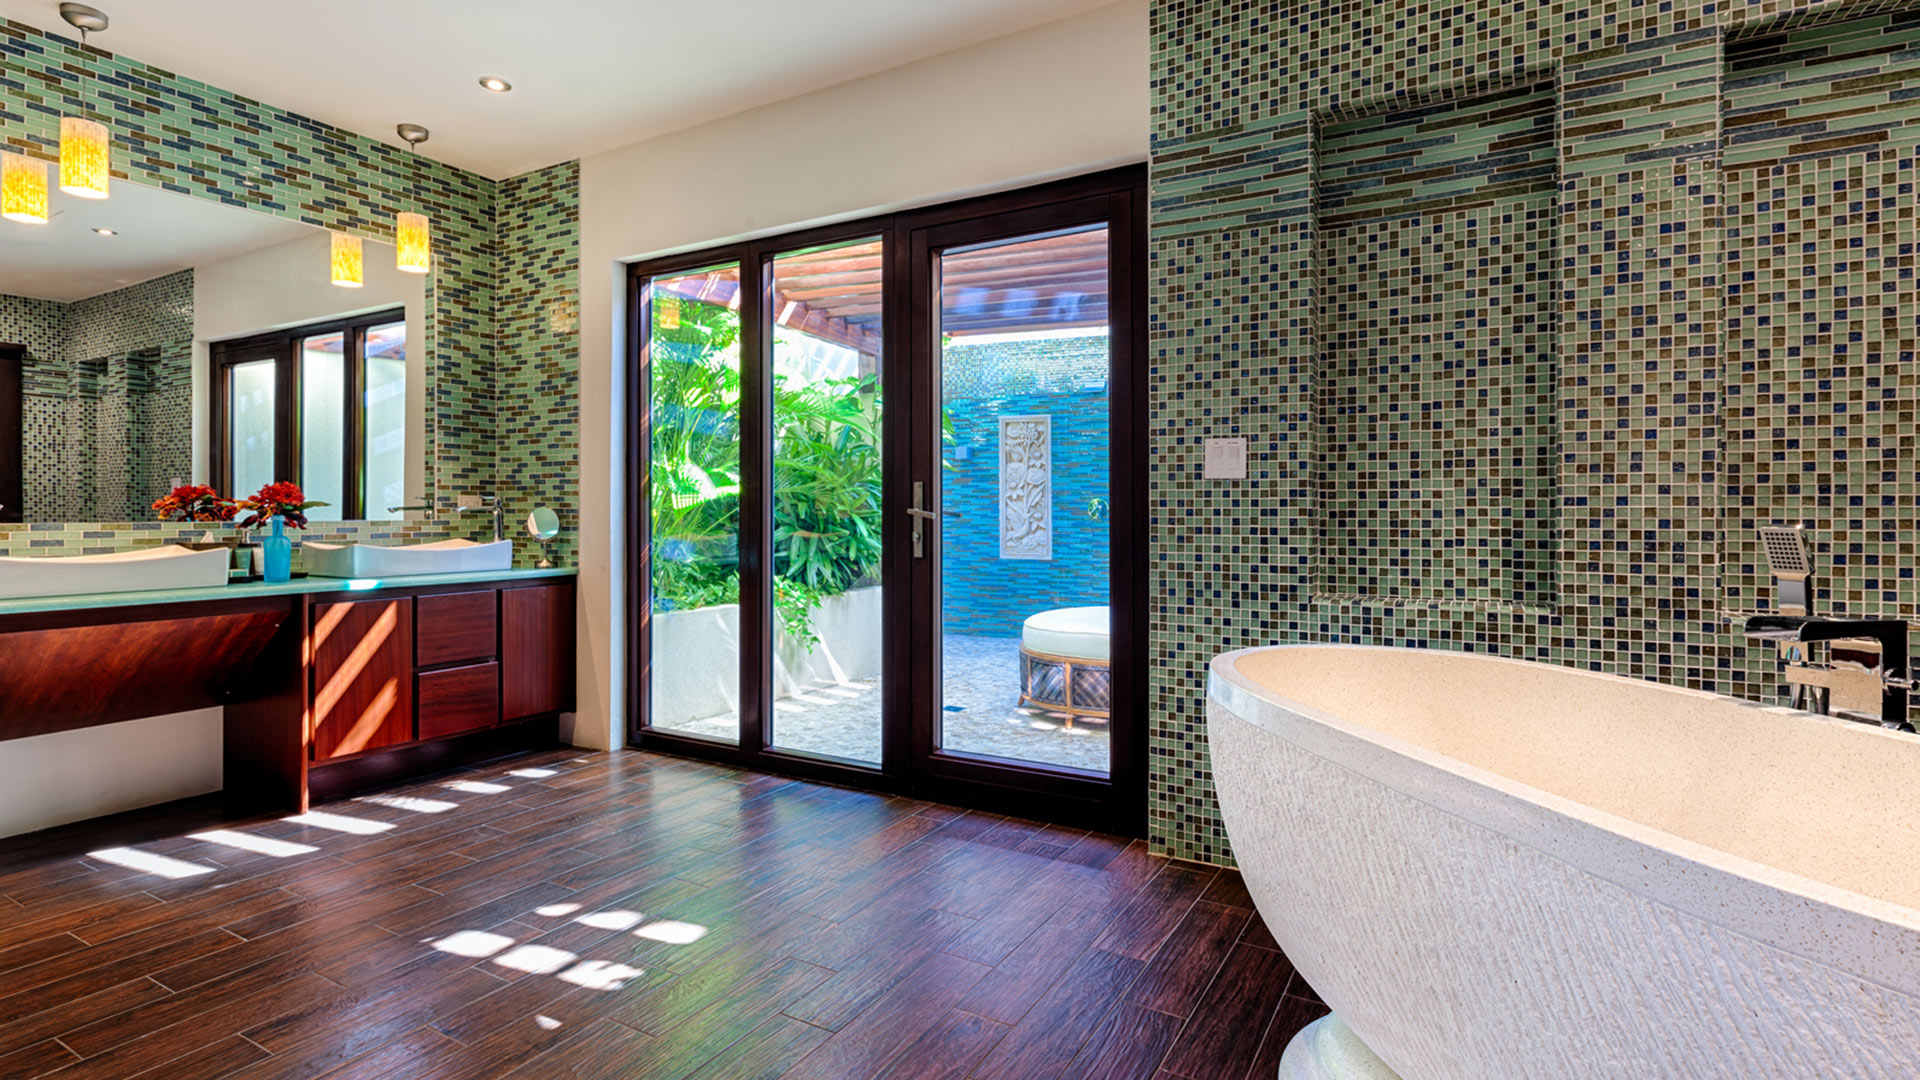 Neveah Villa boasts luxury bathrooms complete with a tub, shower, and outdoor shower